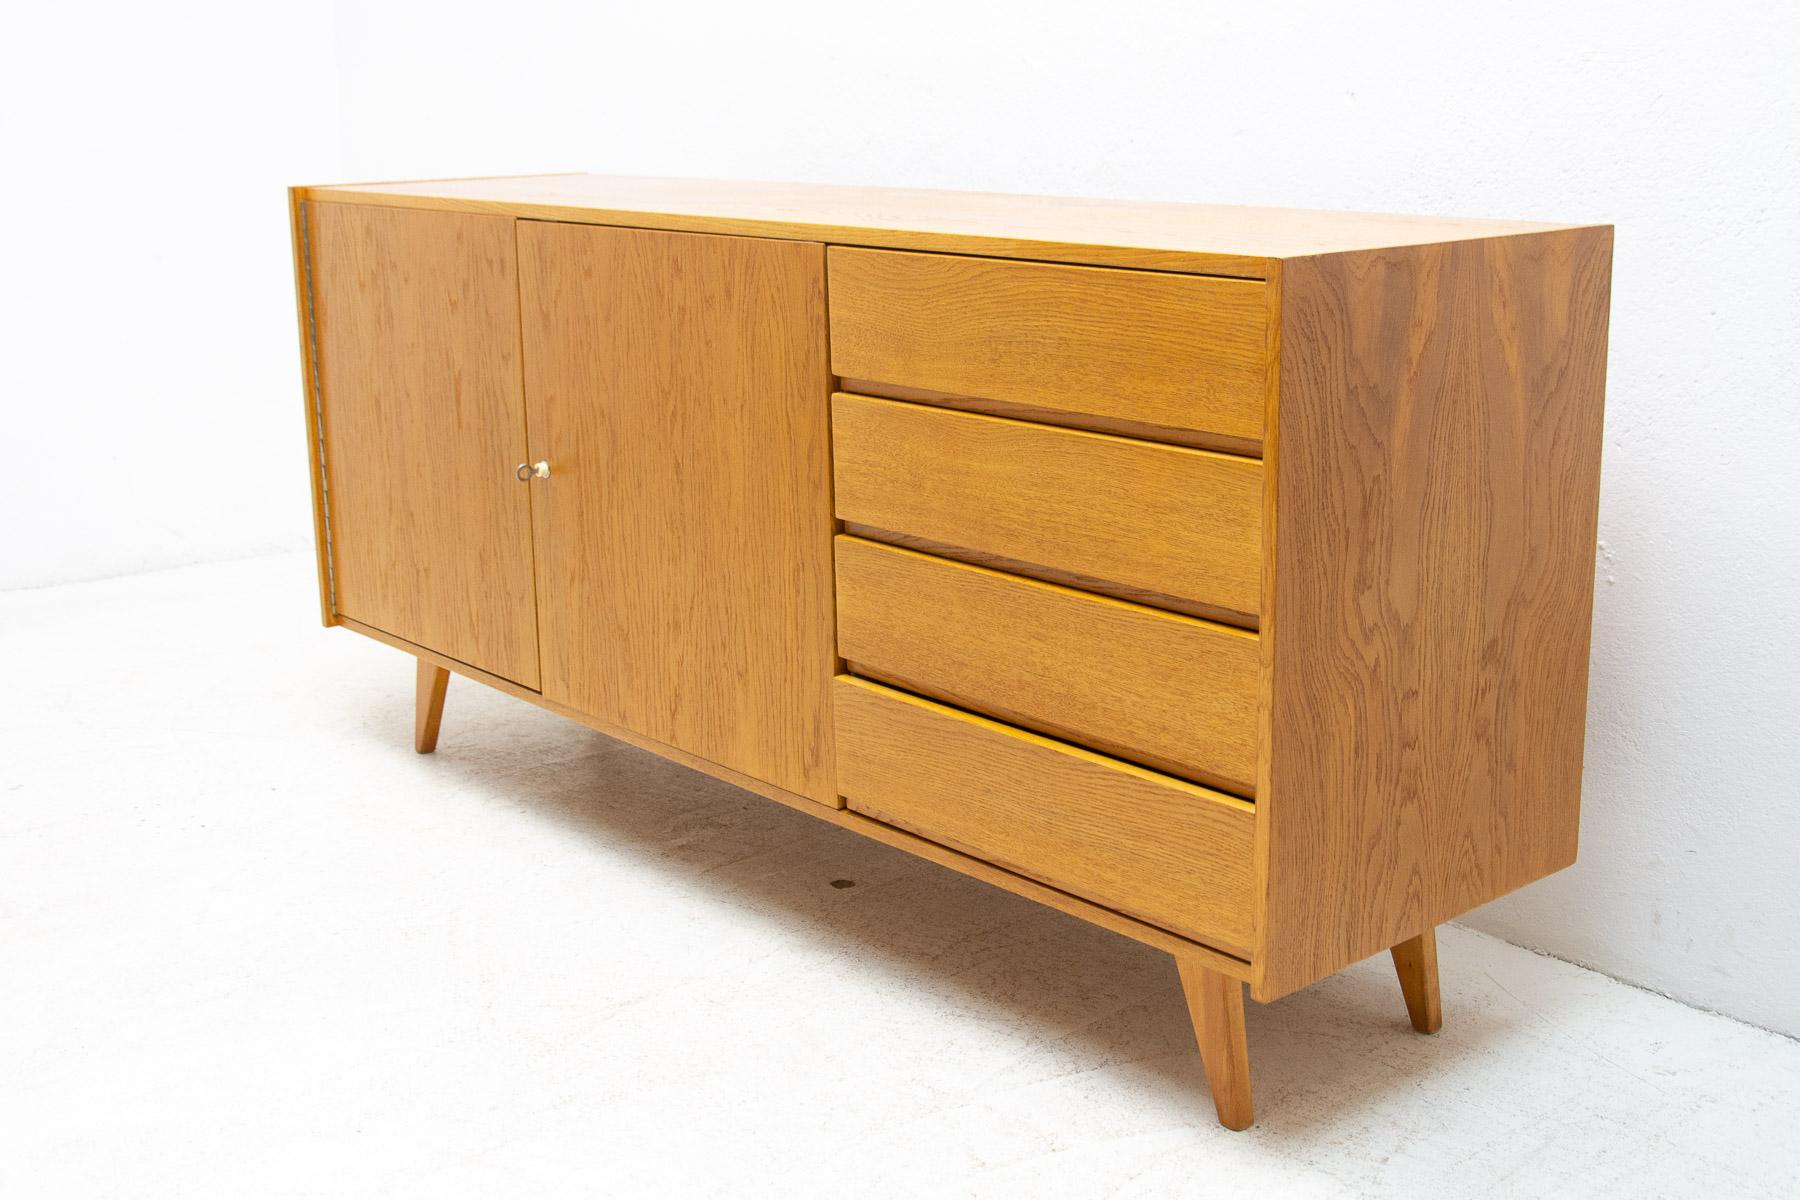 midcentury chest of drawers, model no. U-458, designed by Jiri Jiroutek. It was made in the 1960´s and produced by “Interier Praha”. This model associated with world-renowned EXPO 58-“Brussels period. It features beechwood, plywood, veneered